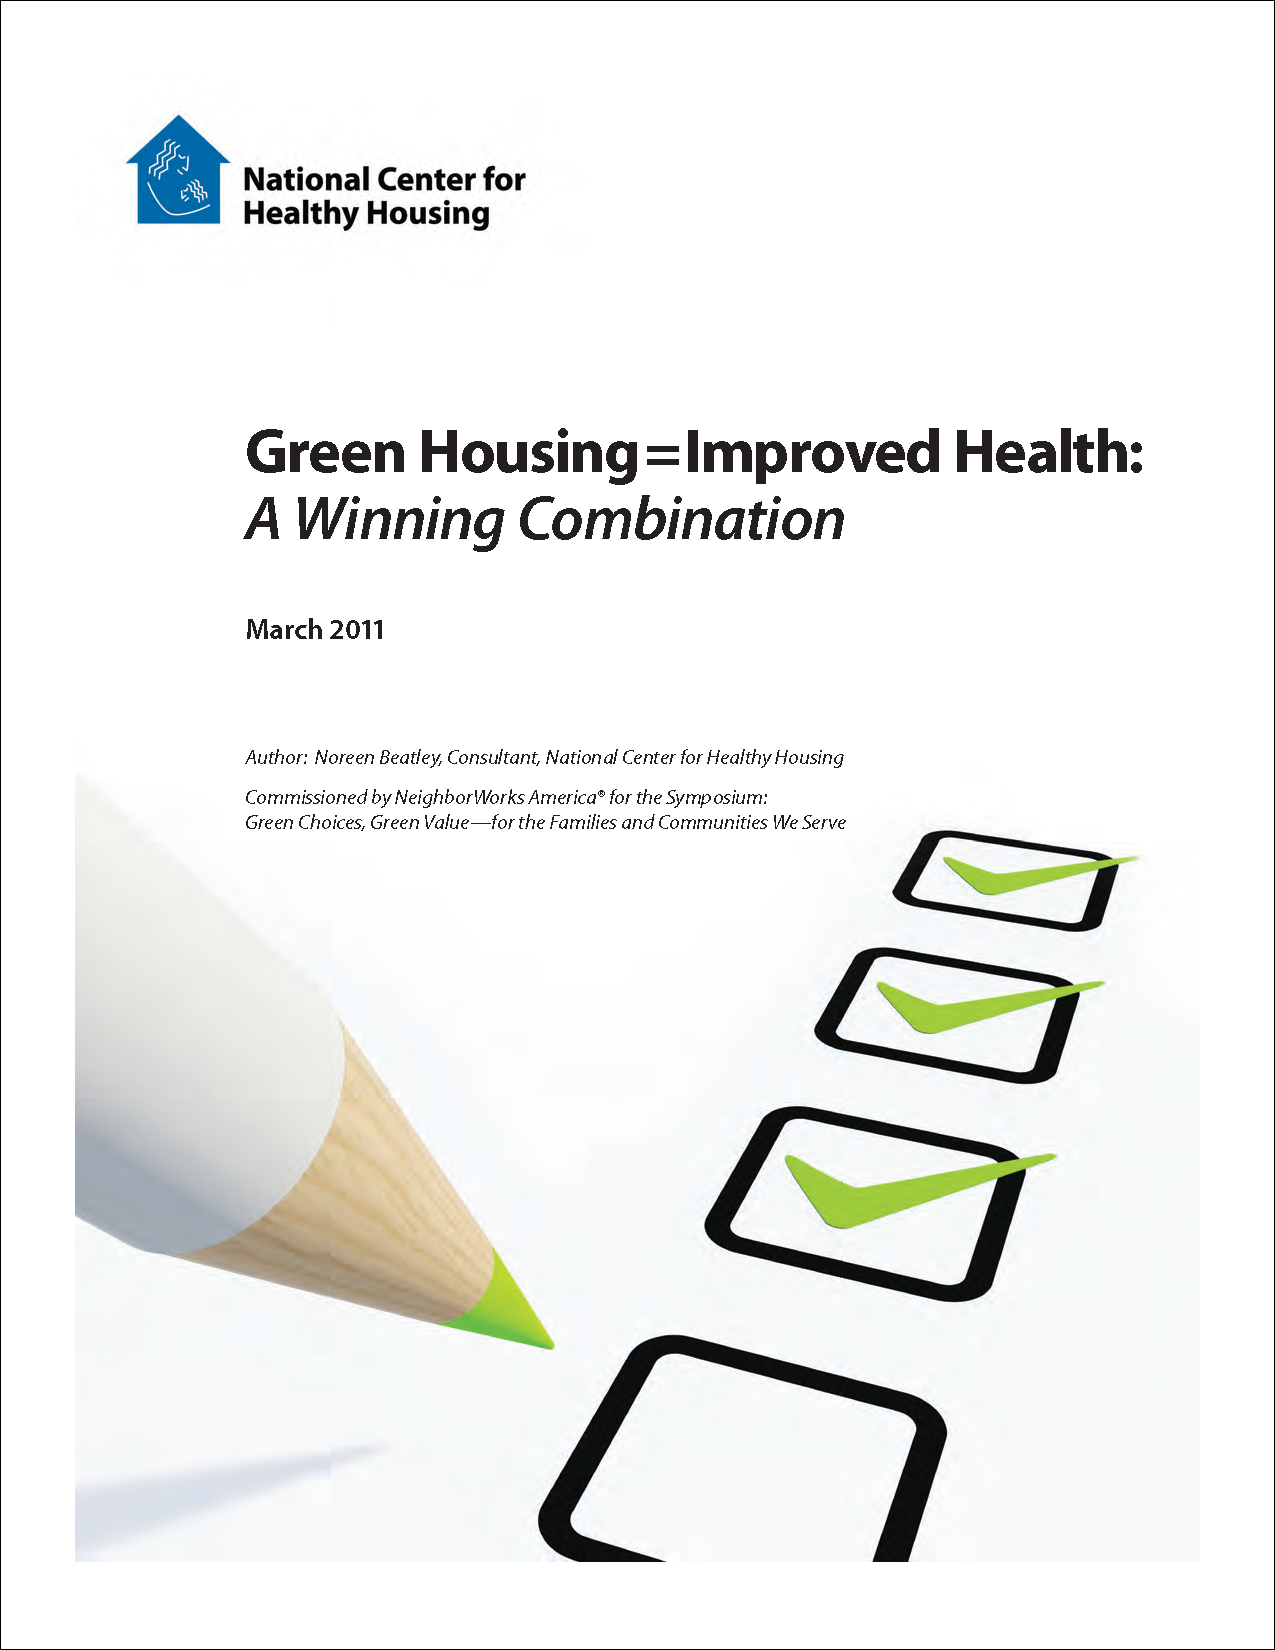 Green Housing = Improved Health: A Winning Combination